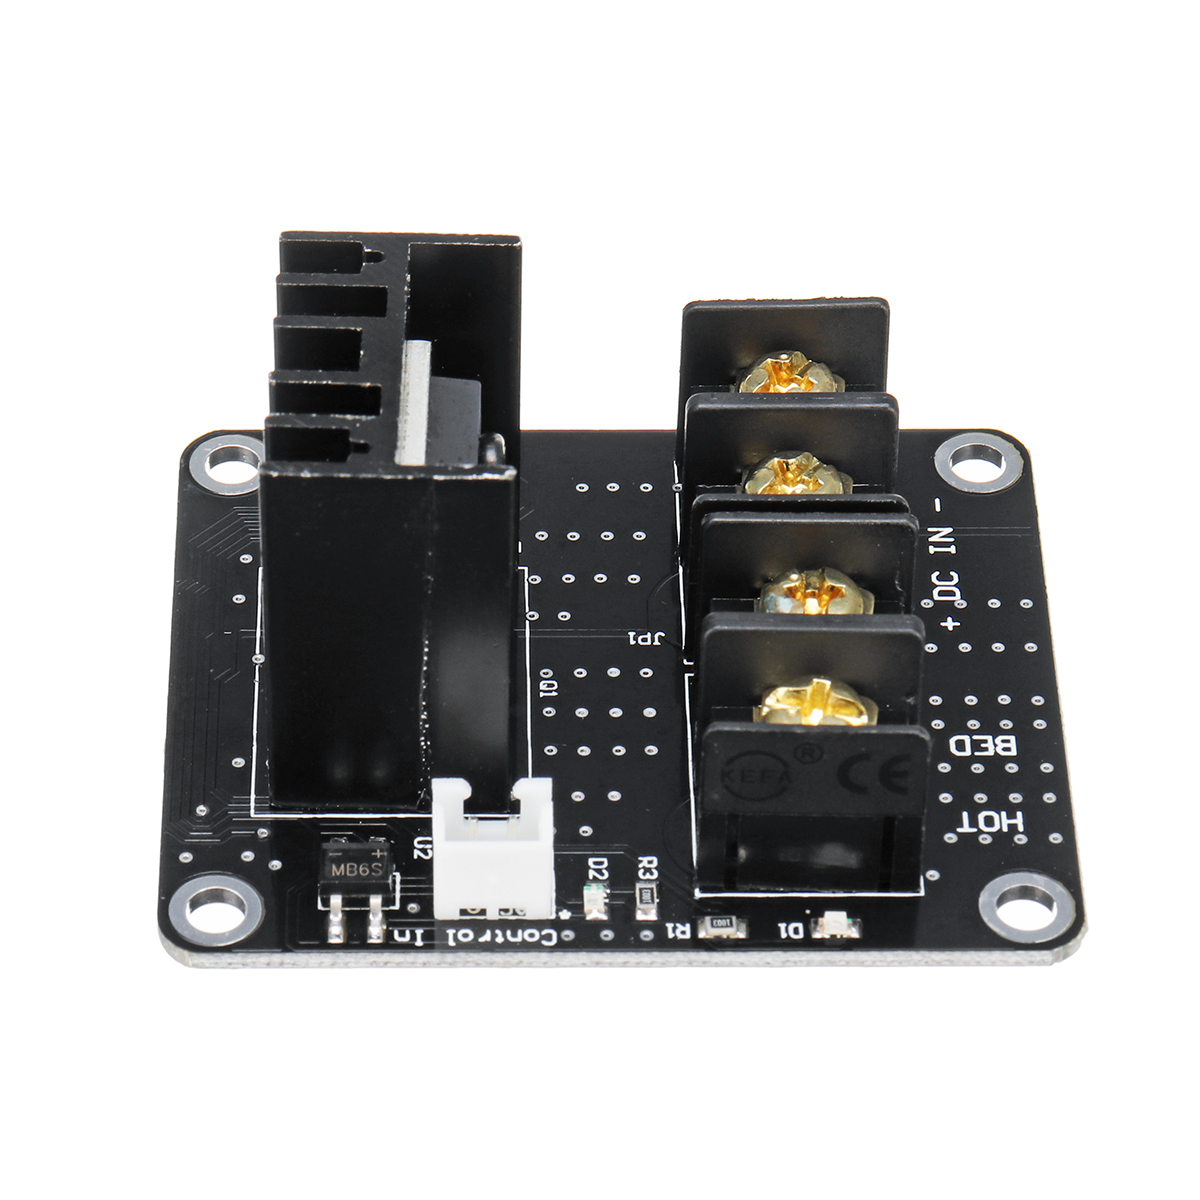 MOSFET High Power Heated Bed Expansion Power Module MOS Tube for 3D Printer Prusa i3 Anet A8/A6 15